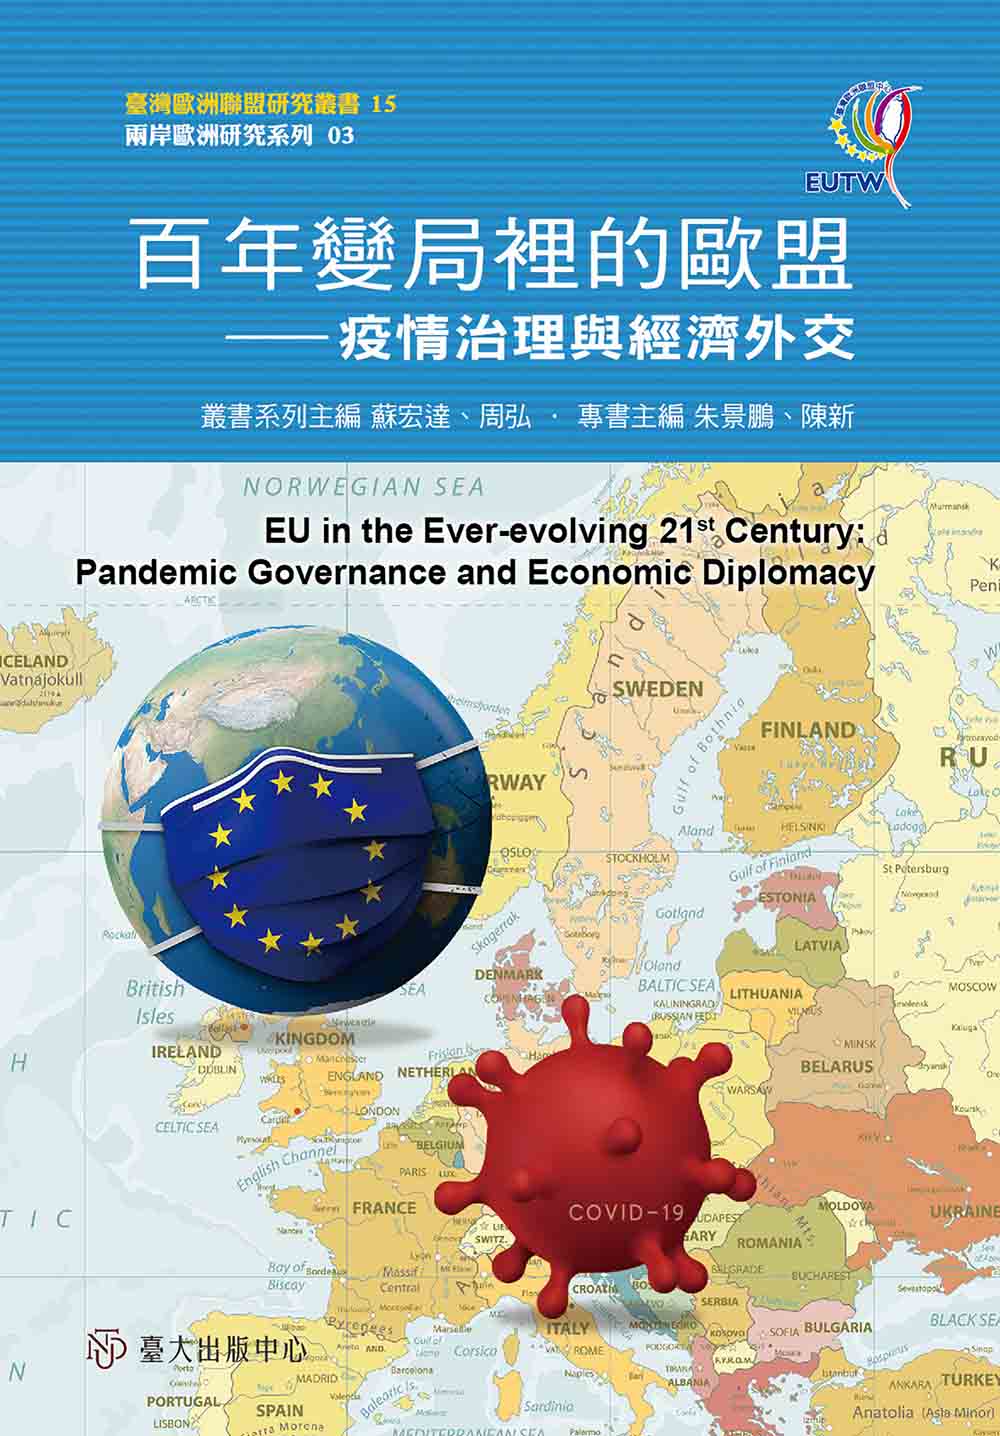 EU in the Ever-evolving 21st Century: Pandemic Governance and Economic Diplomacy